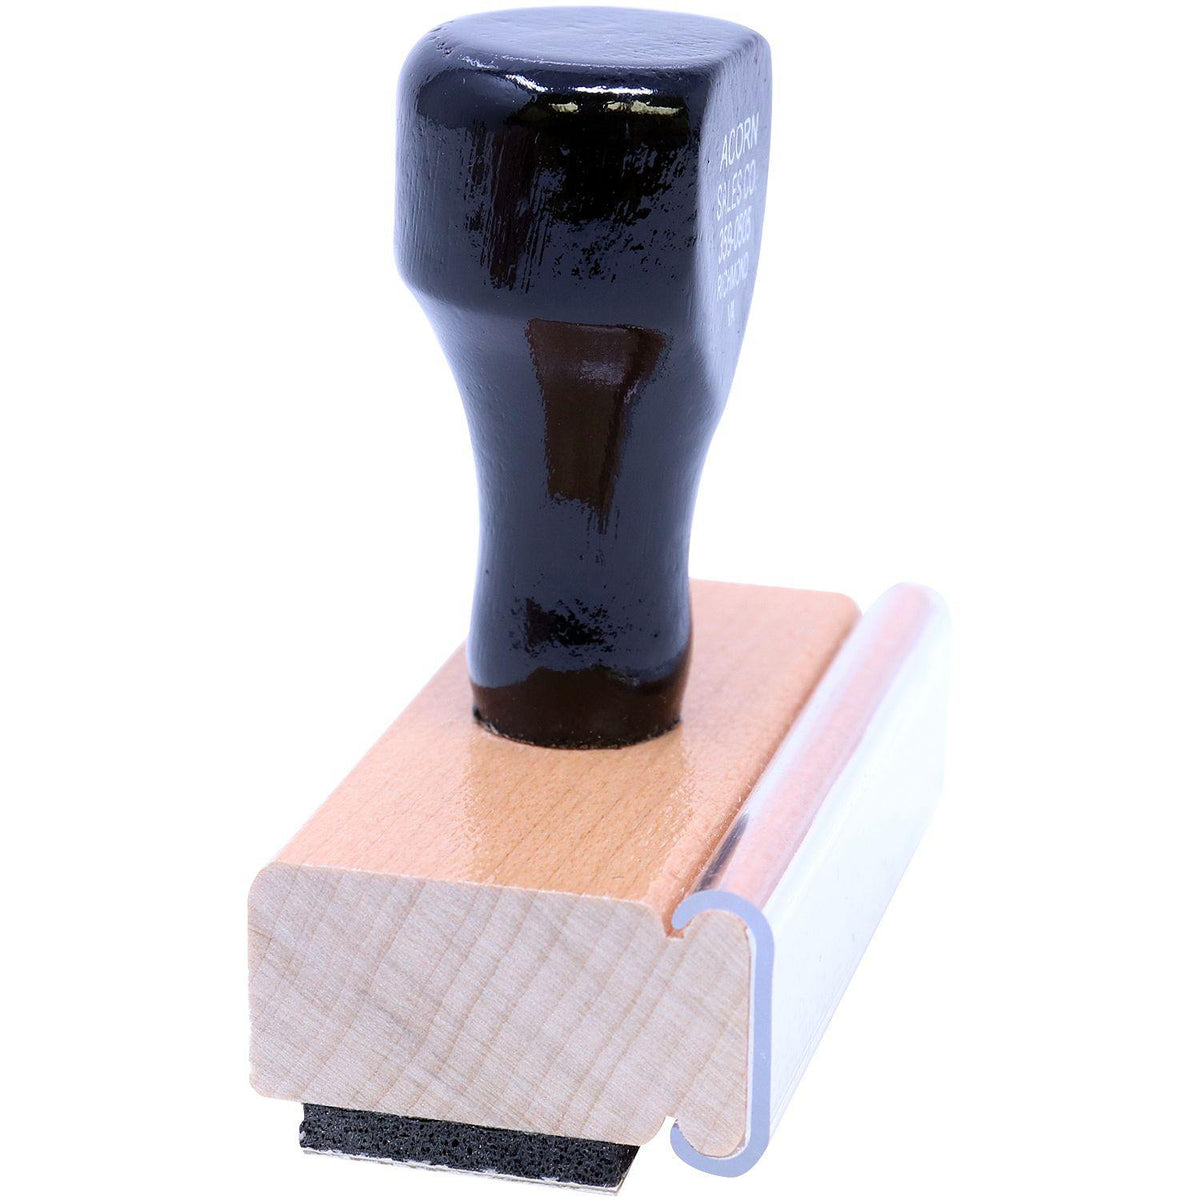 Side View of Good Work Rubber Stamp at an Angle